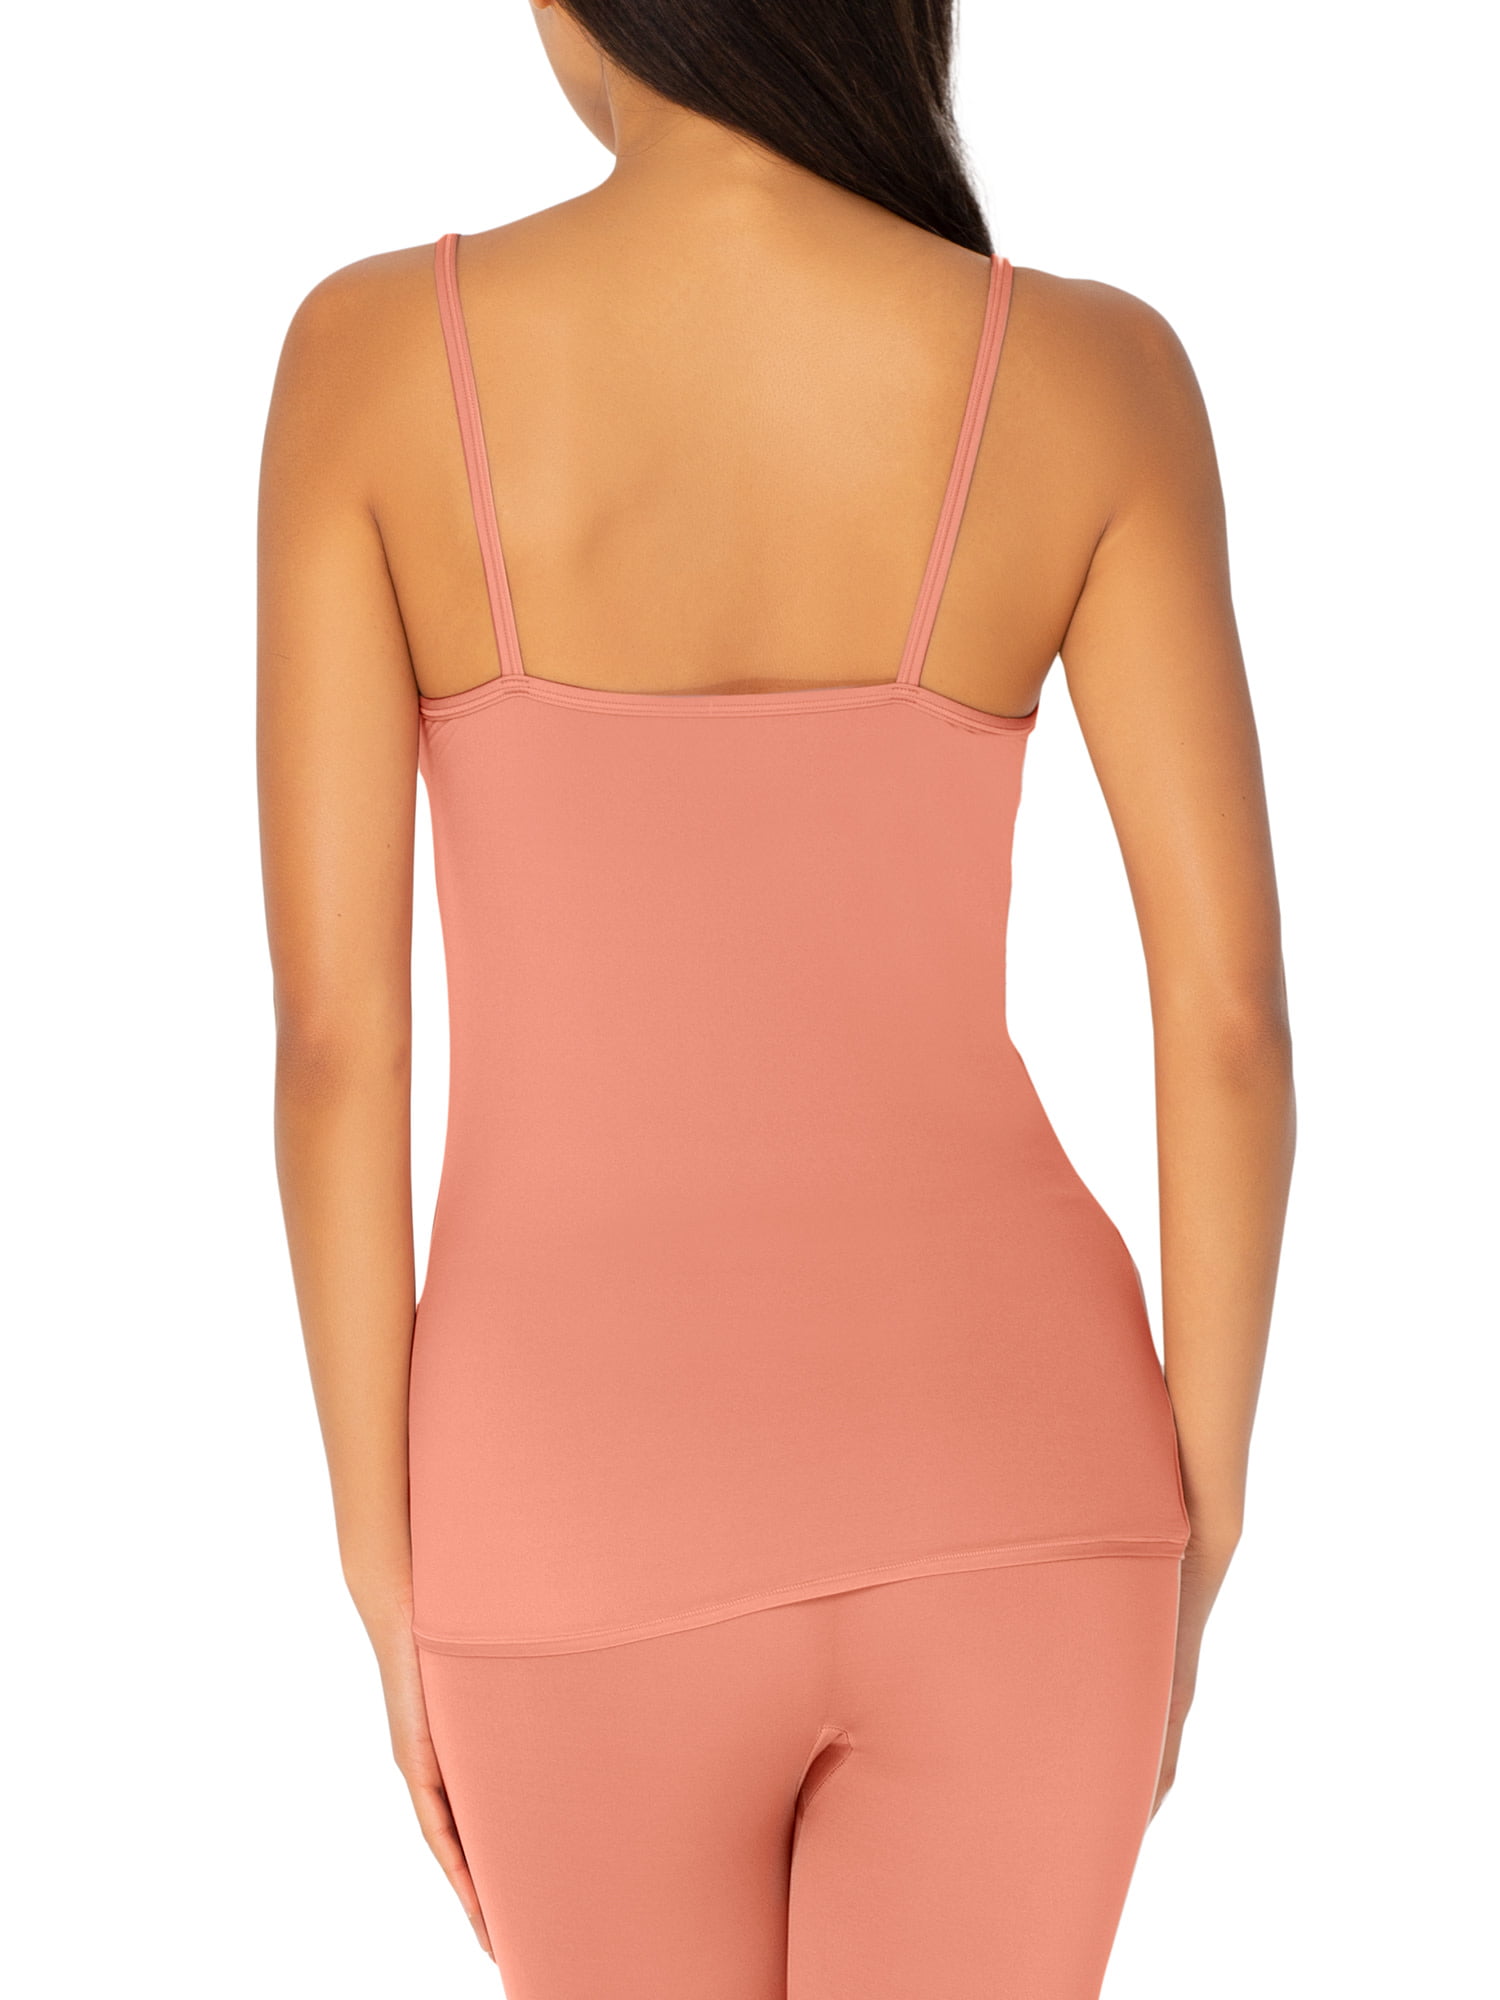 Smart & Sexy Women's Naked Stretch Cami Tank Top Style-SA1433